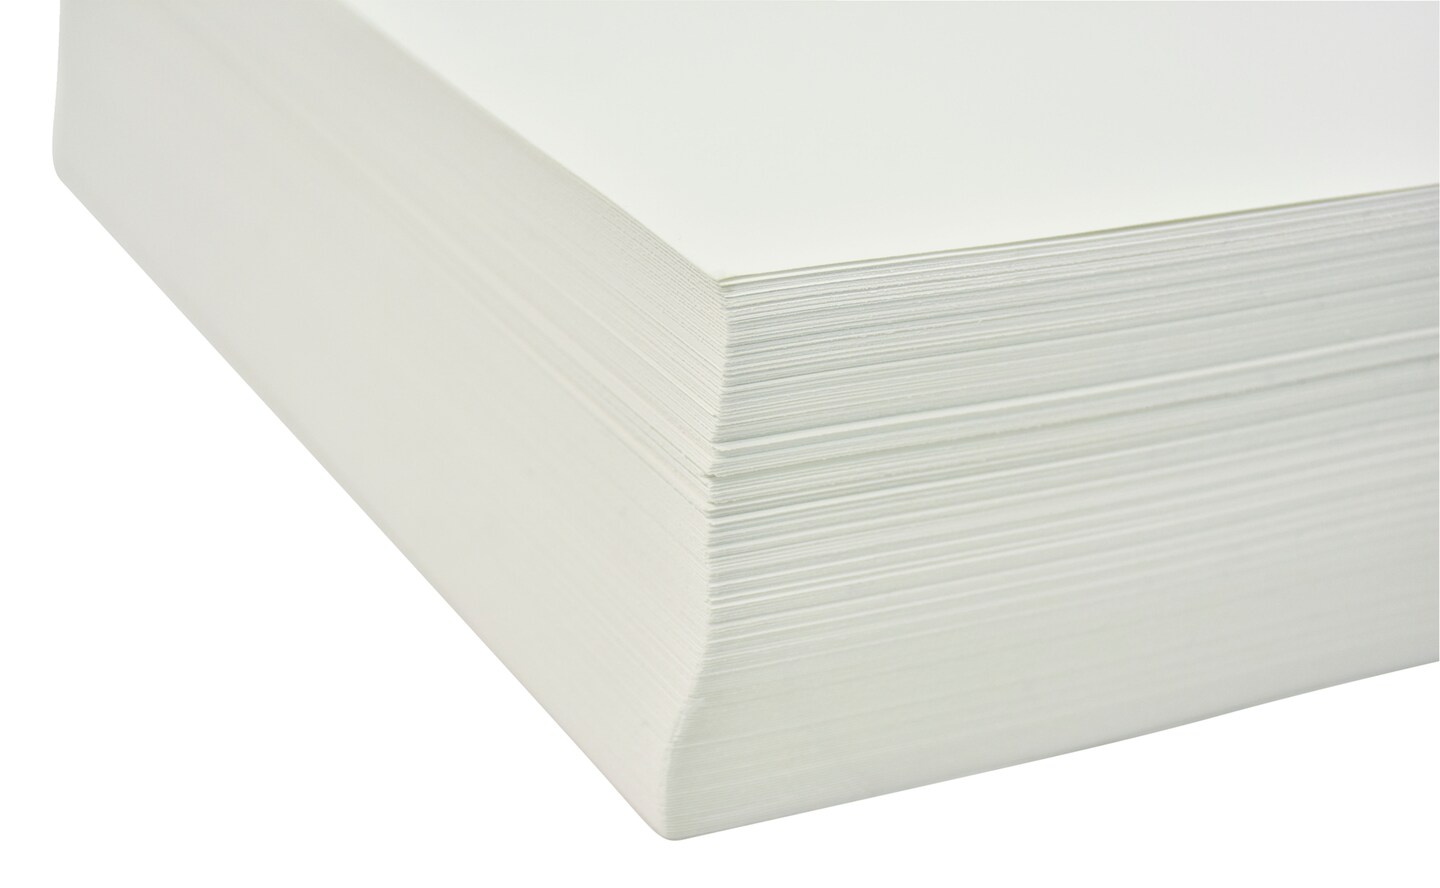 Sax Drawing Paper - 90 Pound - 18 x 24 Inches - 500 Sheets - White